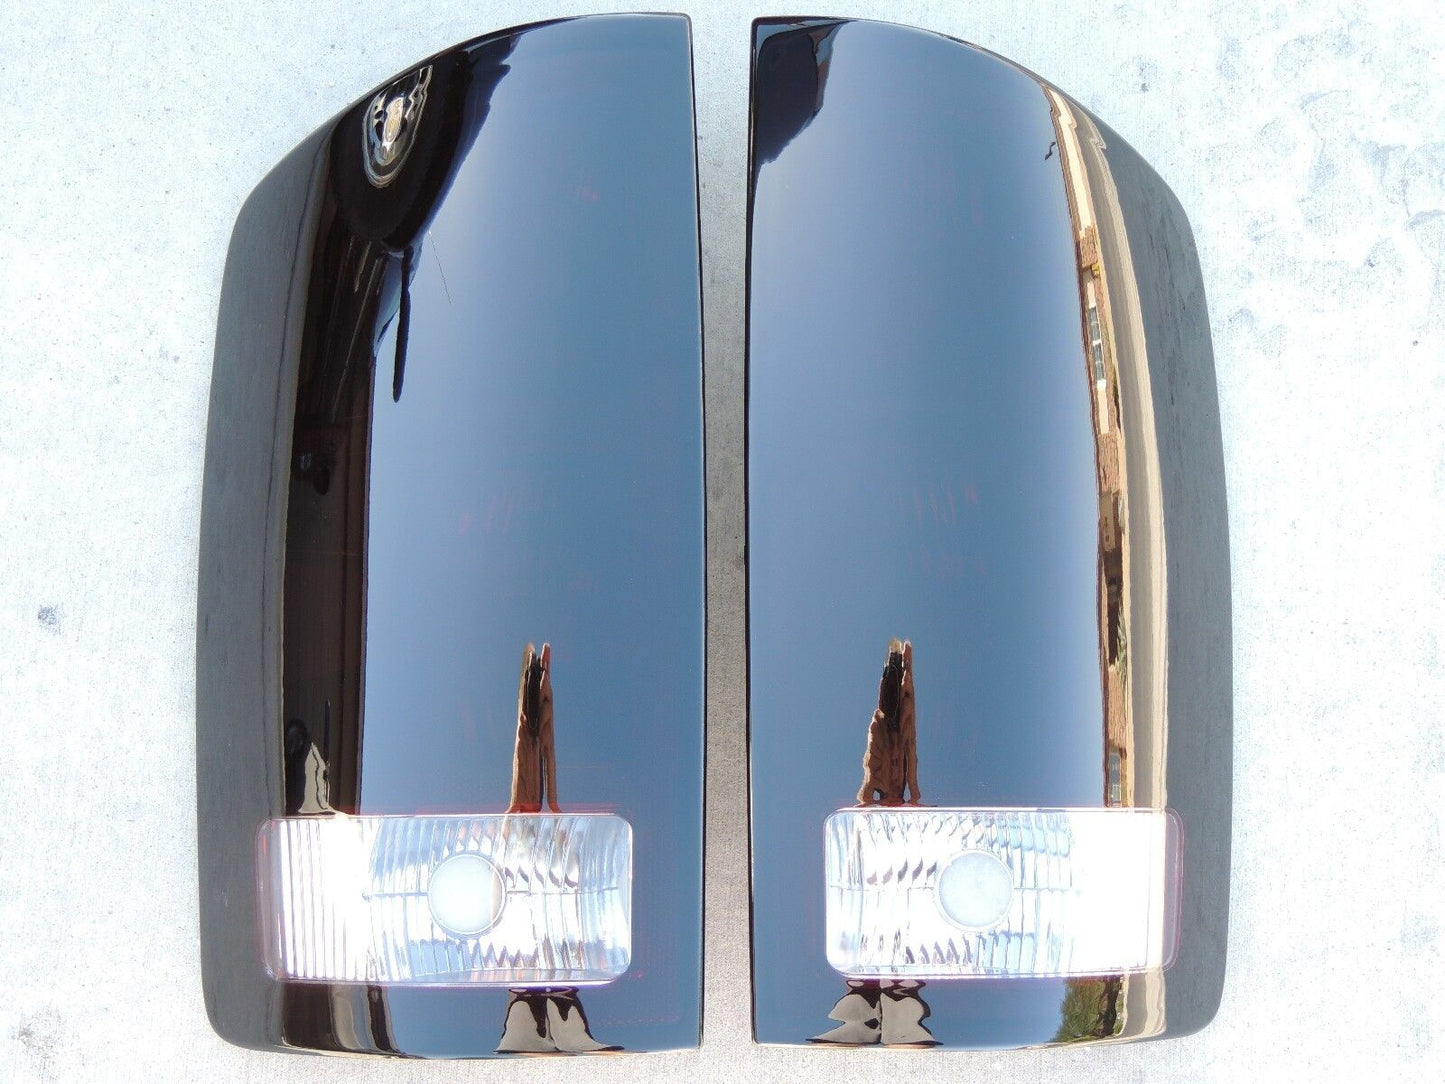 2002-2006 Dodge Ram Smoked Tail Lights (Reverse Clear)